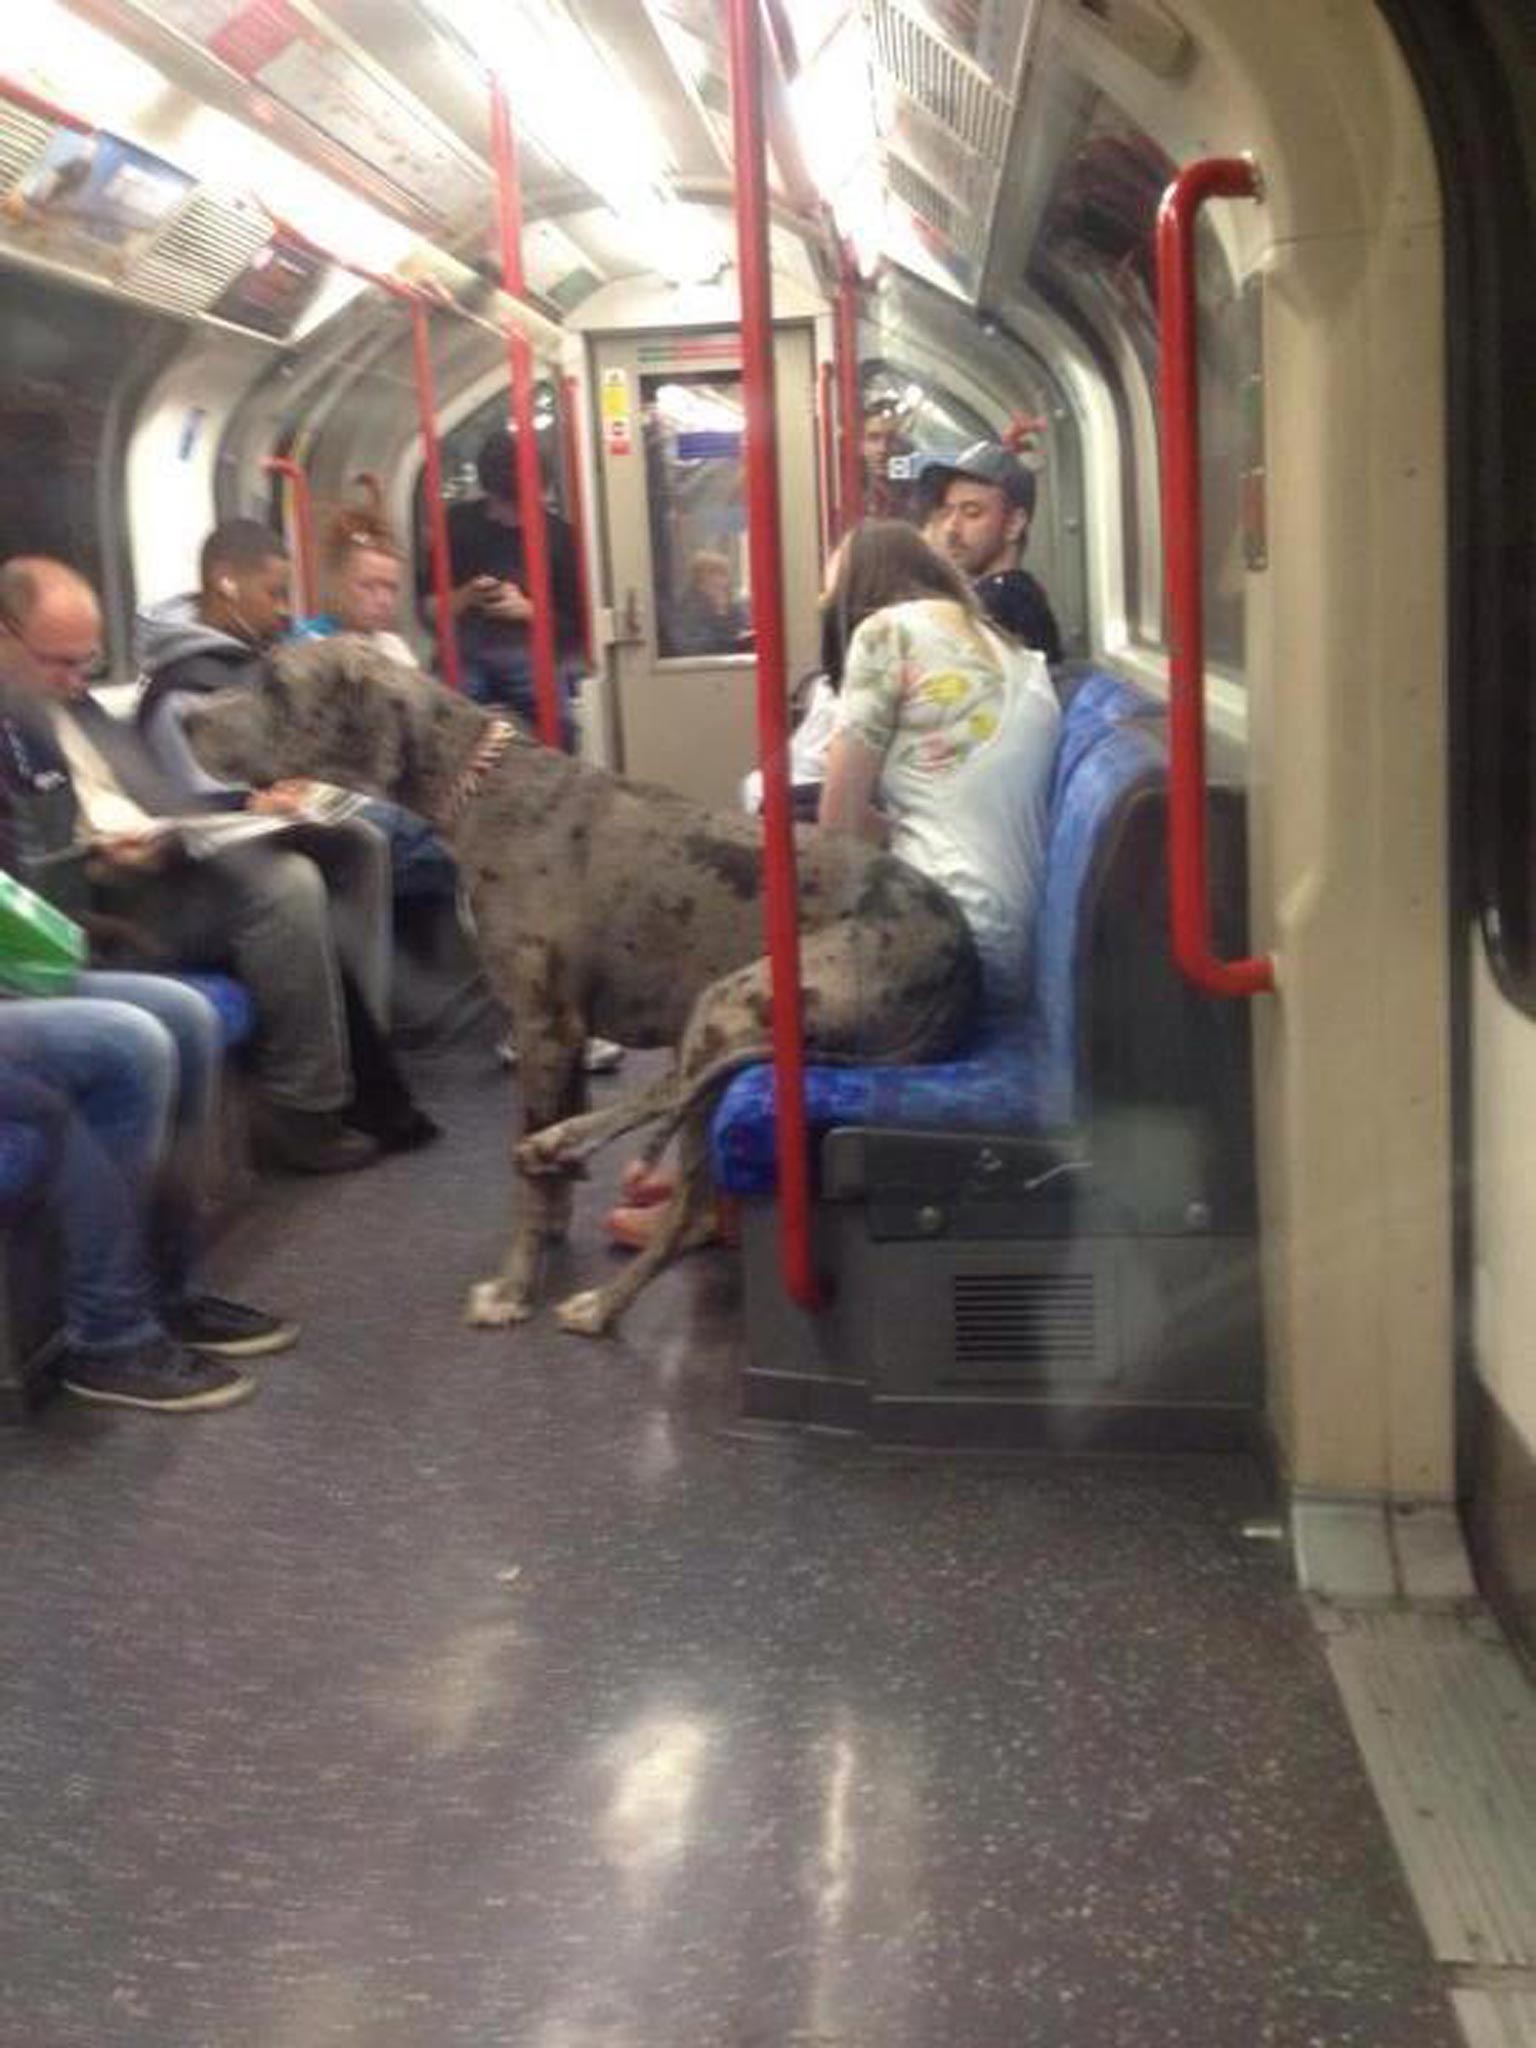 A dog photographed riding the tube